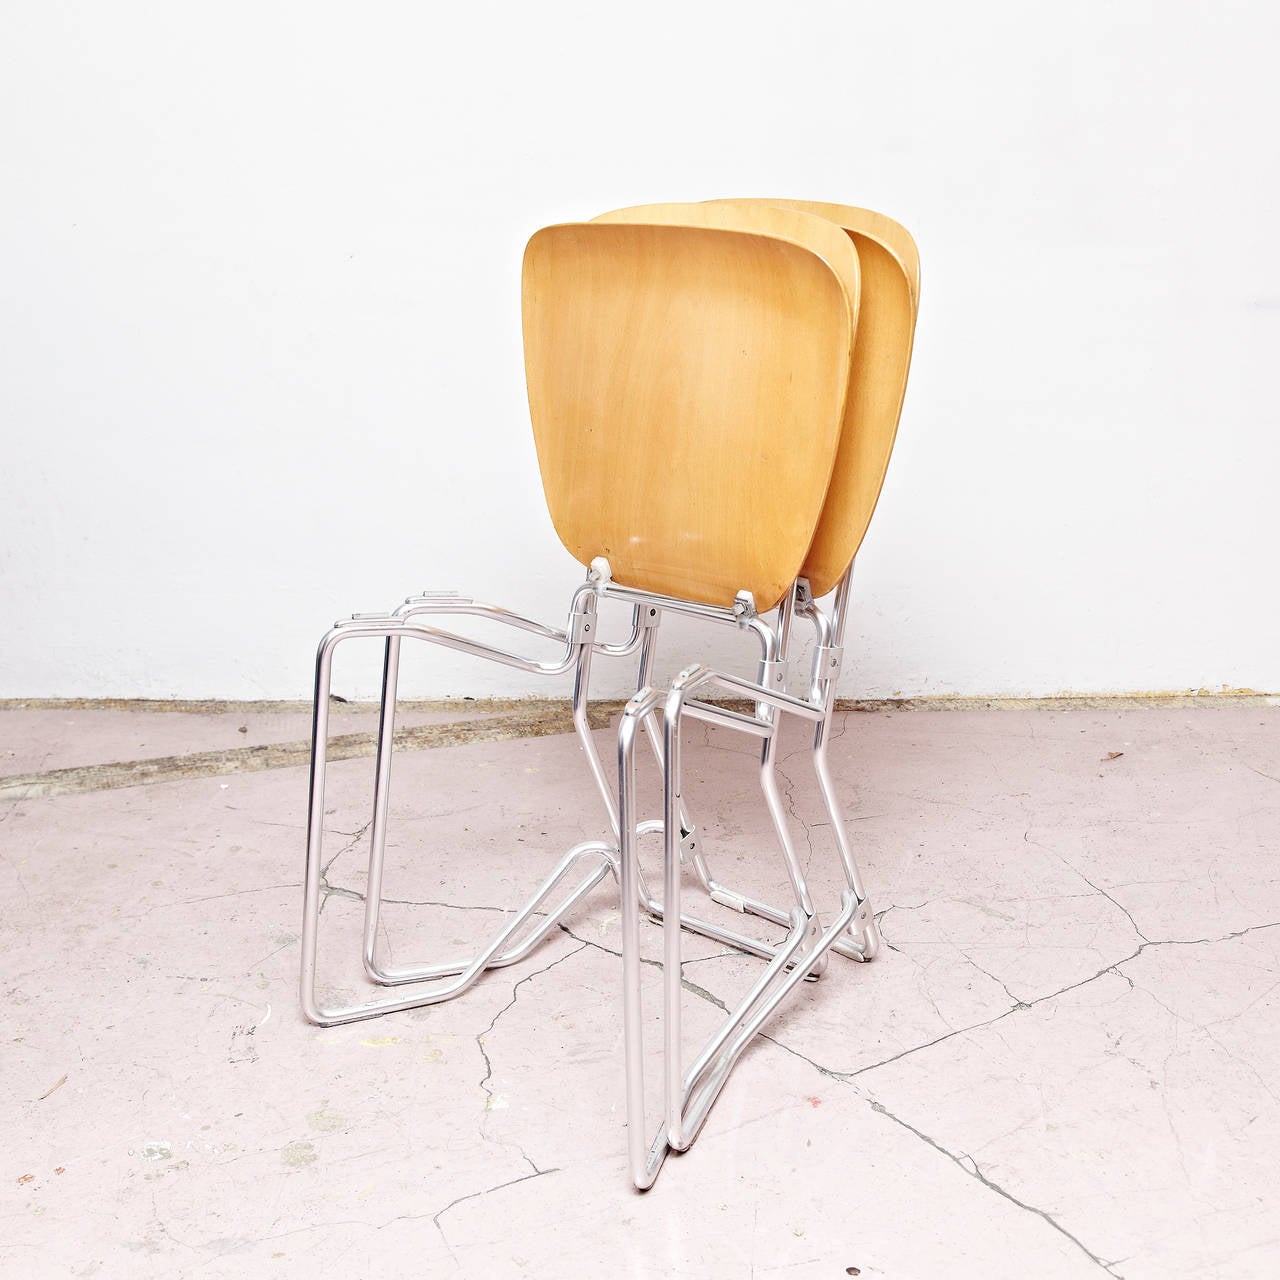 Mid-20th Century Armin Wirth Mid-Century Modern Metal and Wood Swiss Stackable Chairs for Aluflex